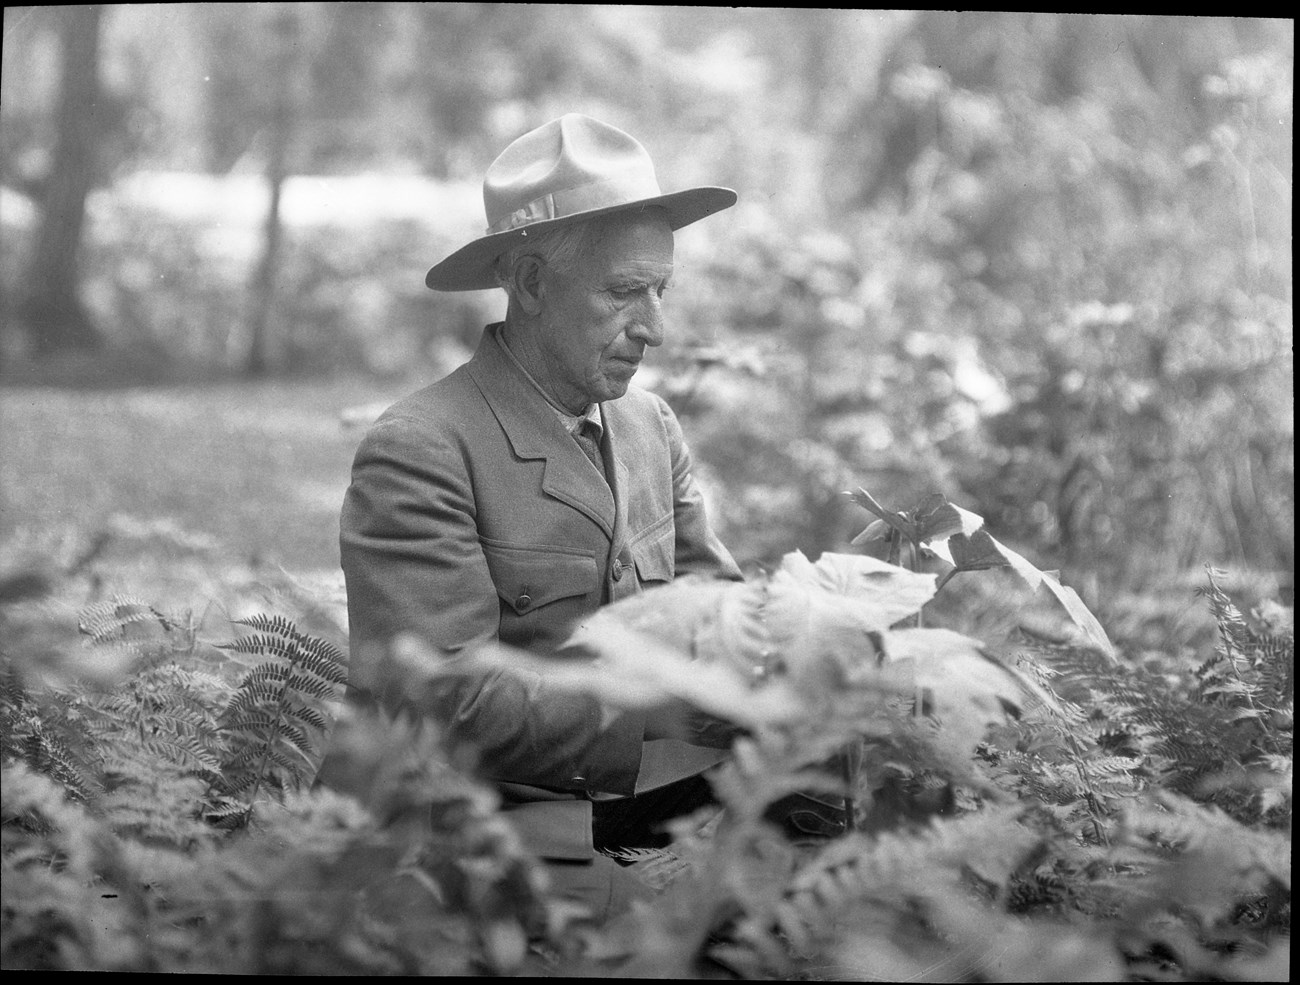 An elderly man wearing a double-breasted suit coat and tie and a flat-brimmed park ranger hat stands among ferns and other forest plants. Only his upper body is visible.